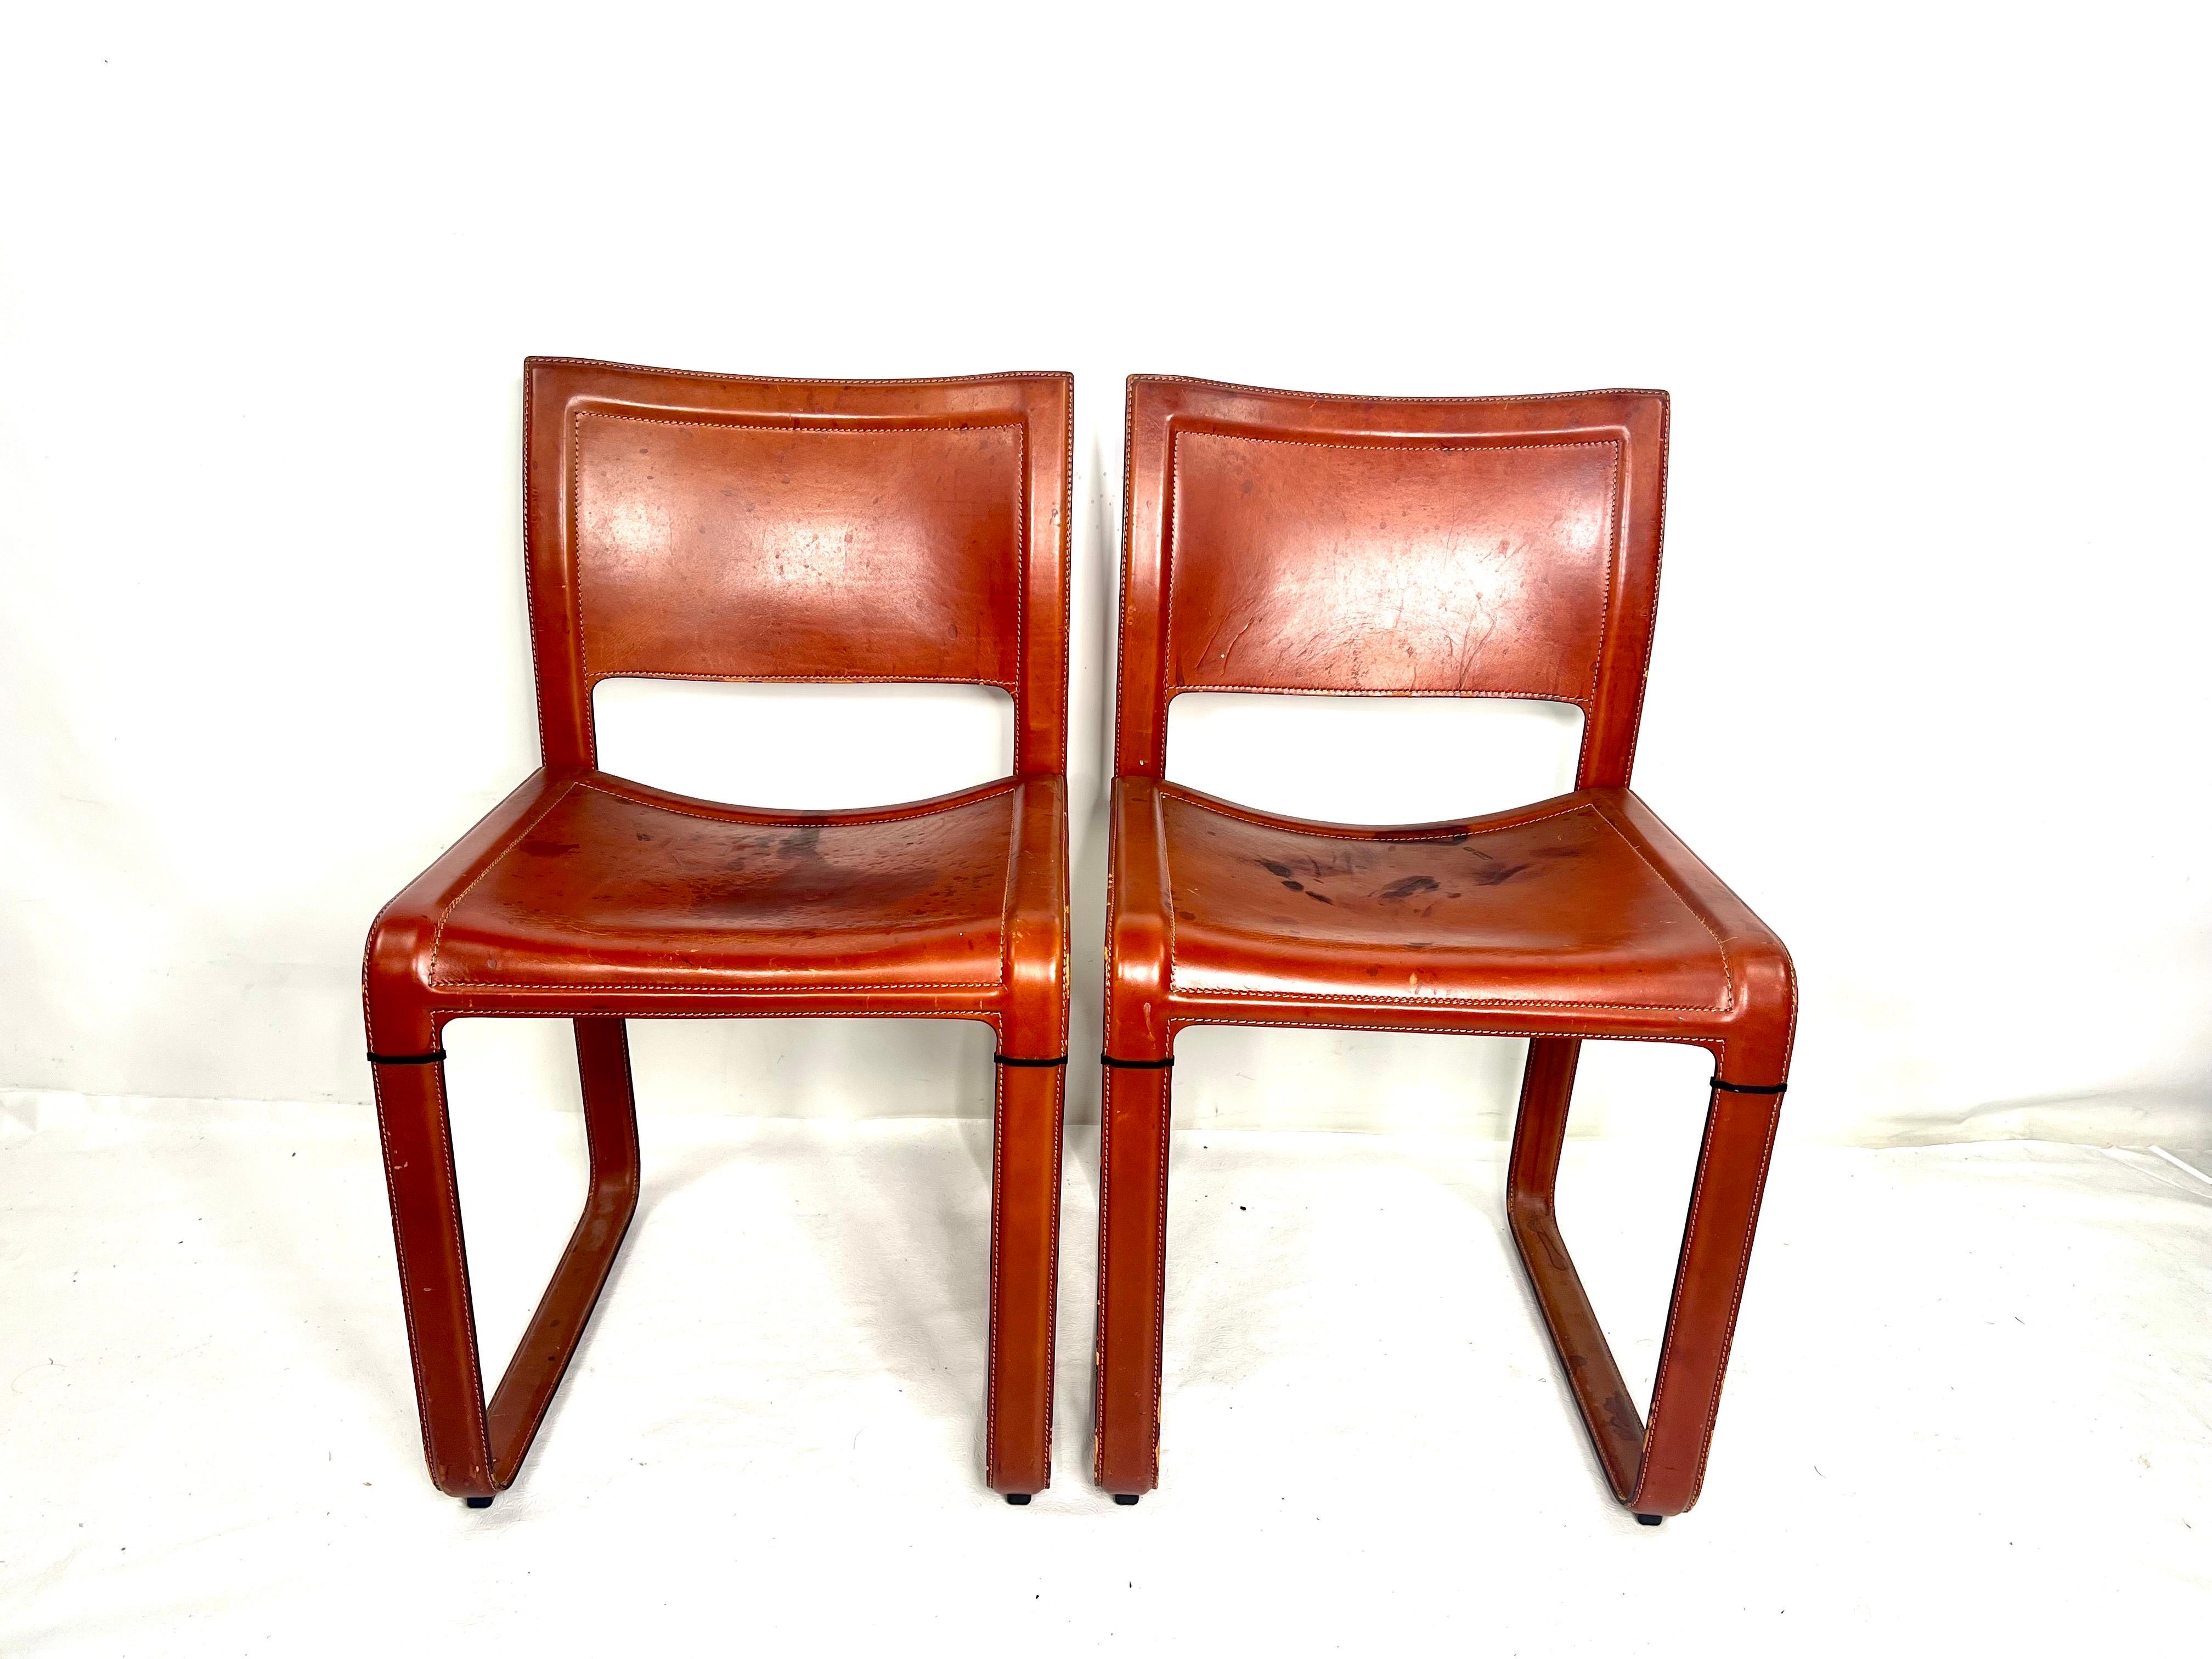 This is a very nice all original pair of chairs made by Matteo Grassi. The chairs have a great patina from age.